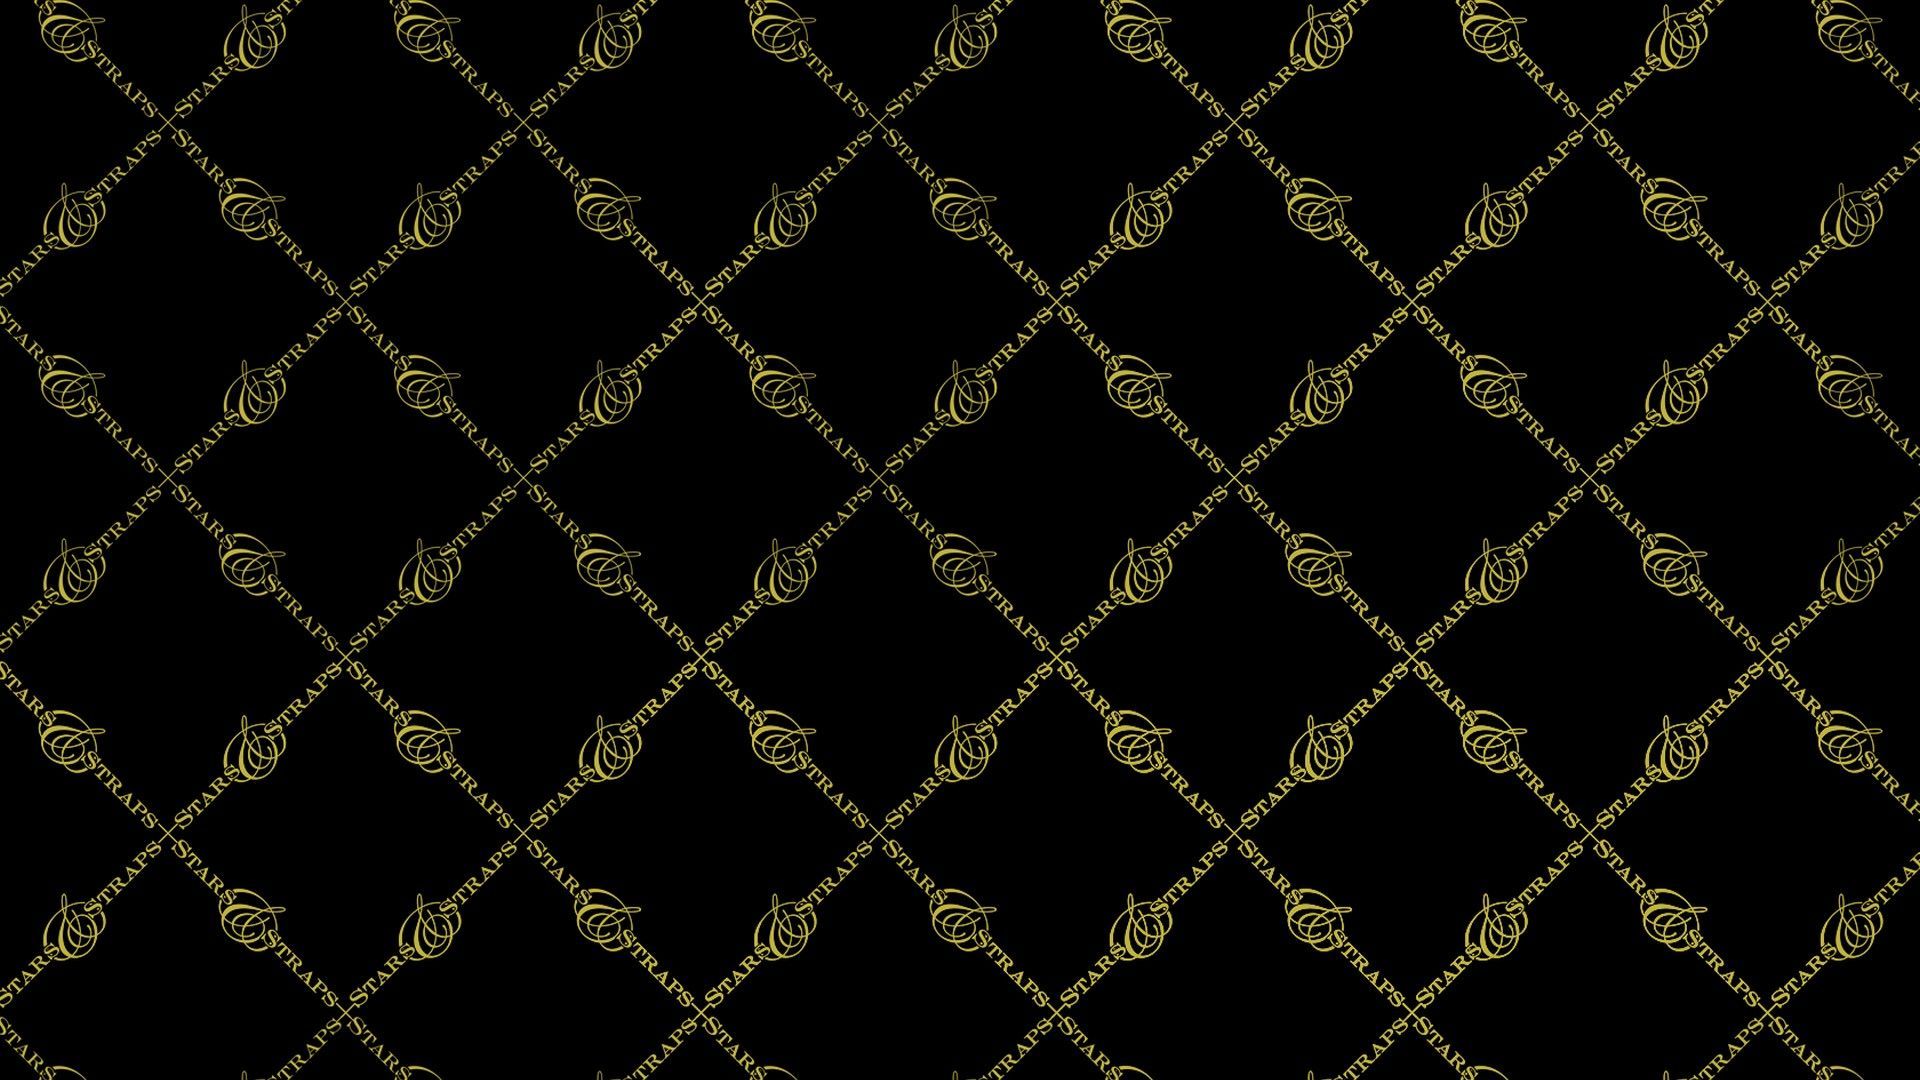 Black and Gold Computer Wallpapers on